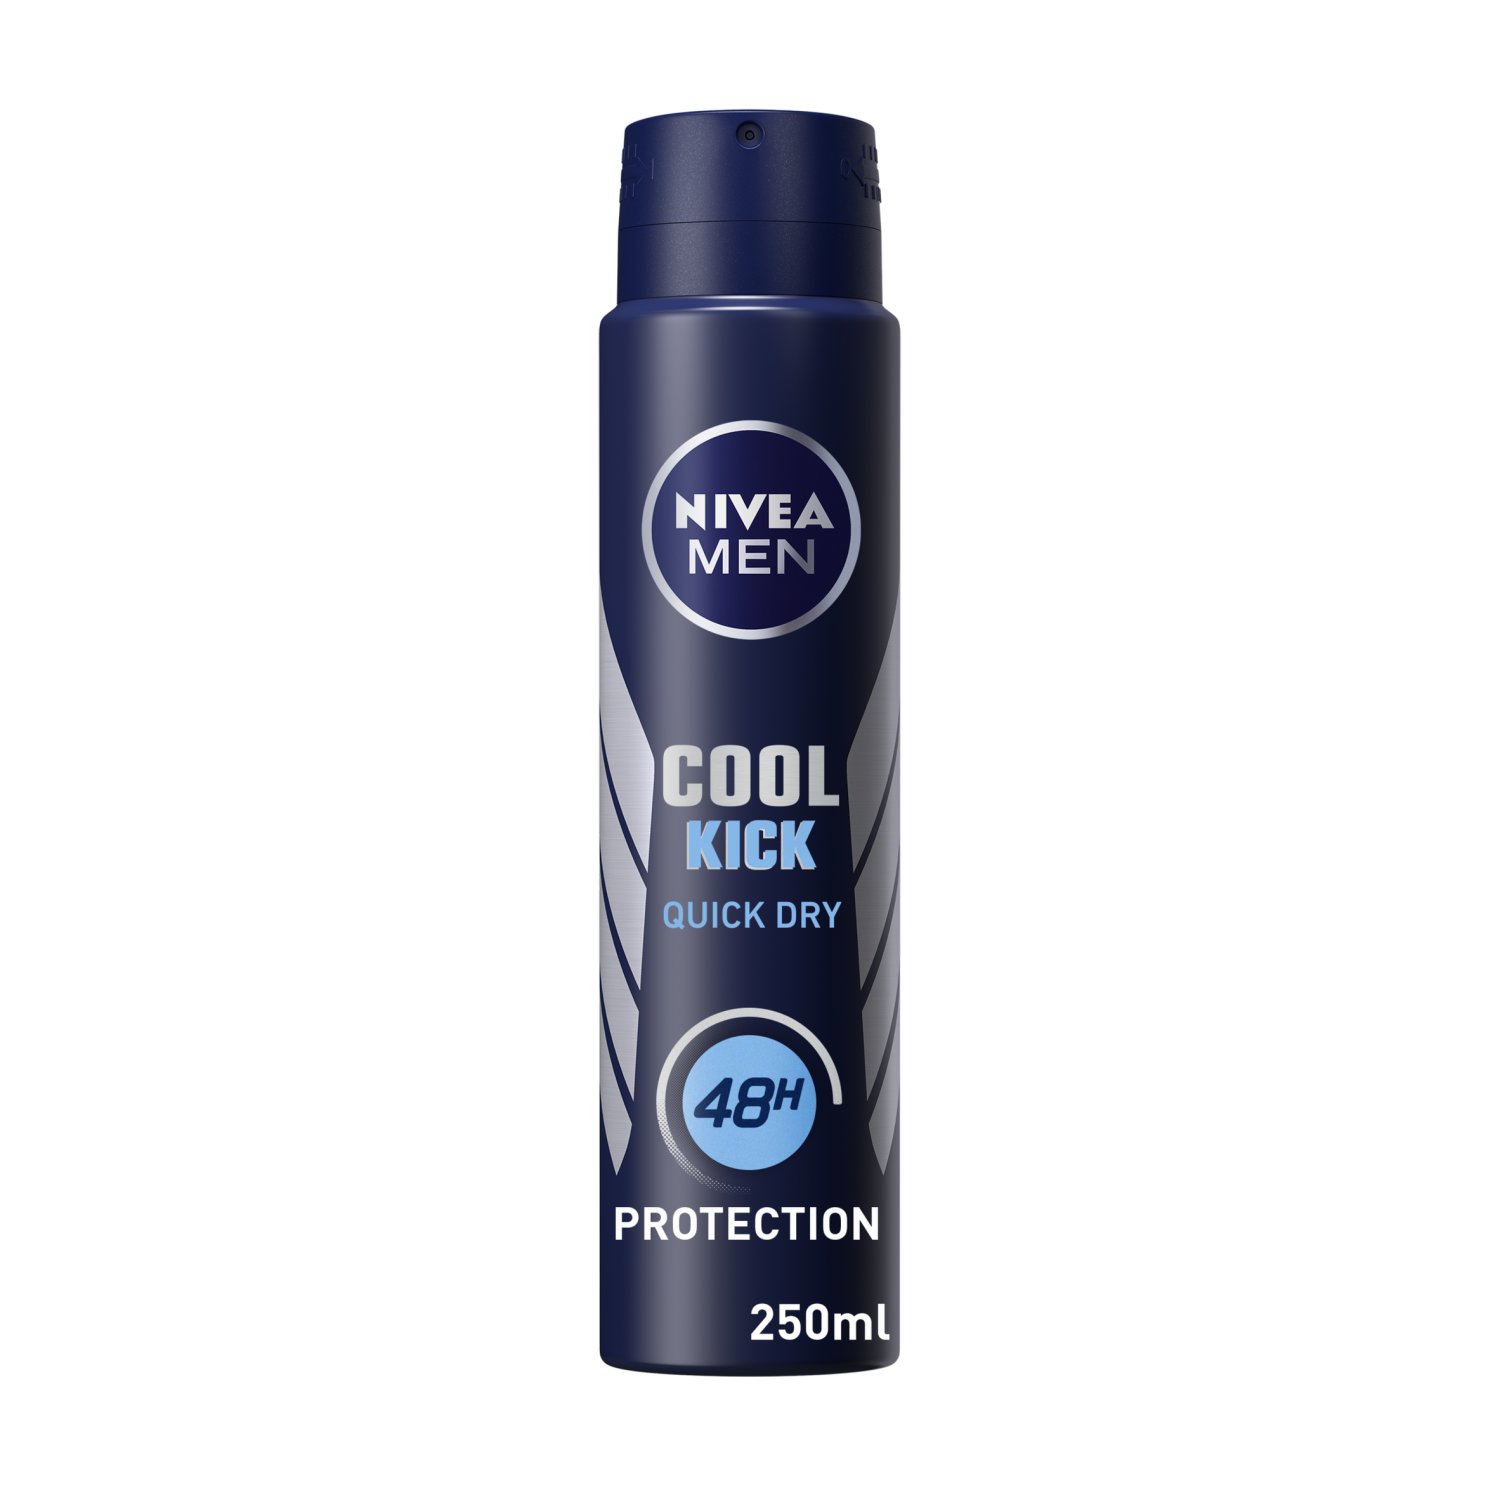 NIVEA MEN Cool Kick anti-perspirant deodorant spray instantly offers you vitalising freshness and gives you 48 hours reliable protection against sweat and body odour. The deodorant combines a fresh and comfortable skin feeling with care for your underarm skin.
Invigorating like a marine breeze... salty air with hints of sea grass, citrus scents floating gently on ocean waves...off on an adventure beneath a bright blue sky…
A perfect vitalizing freshness designed for men who want to extend the shower experience all day long !